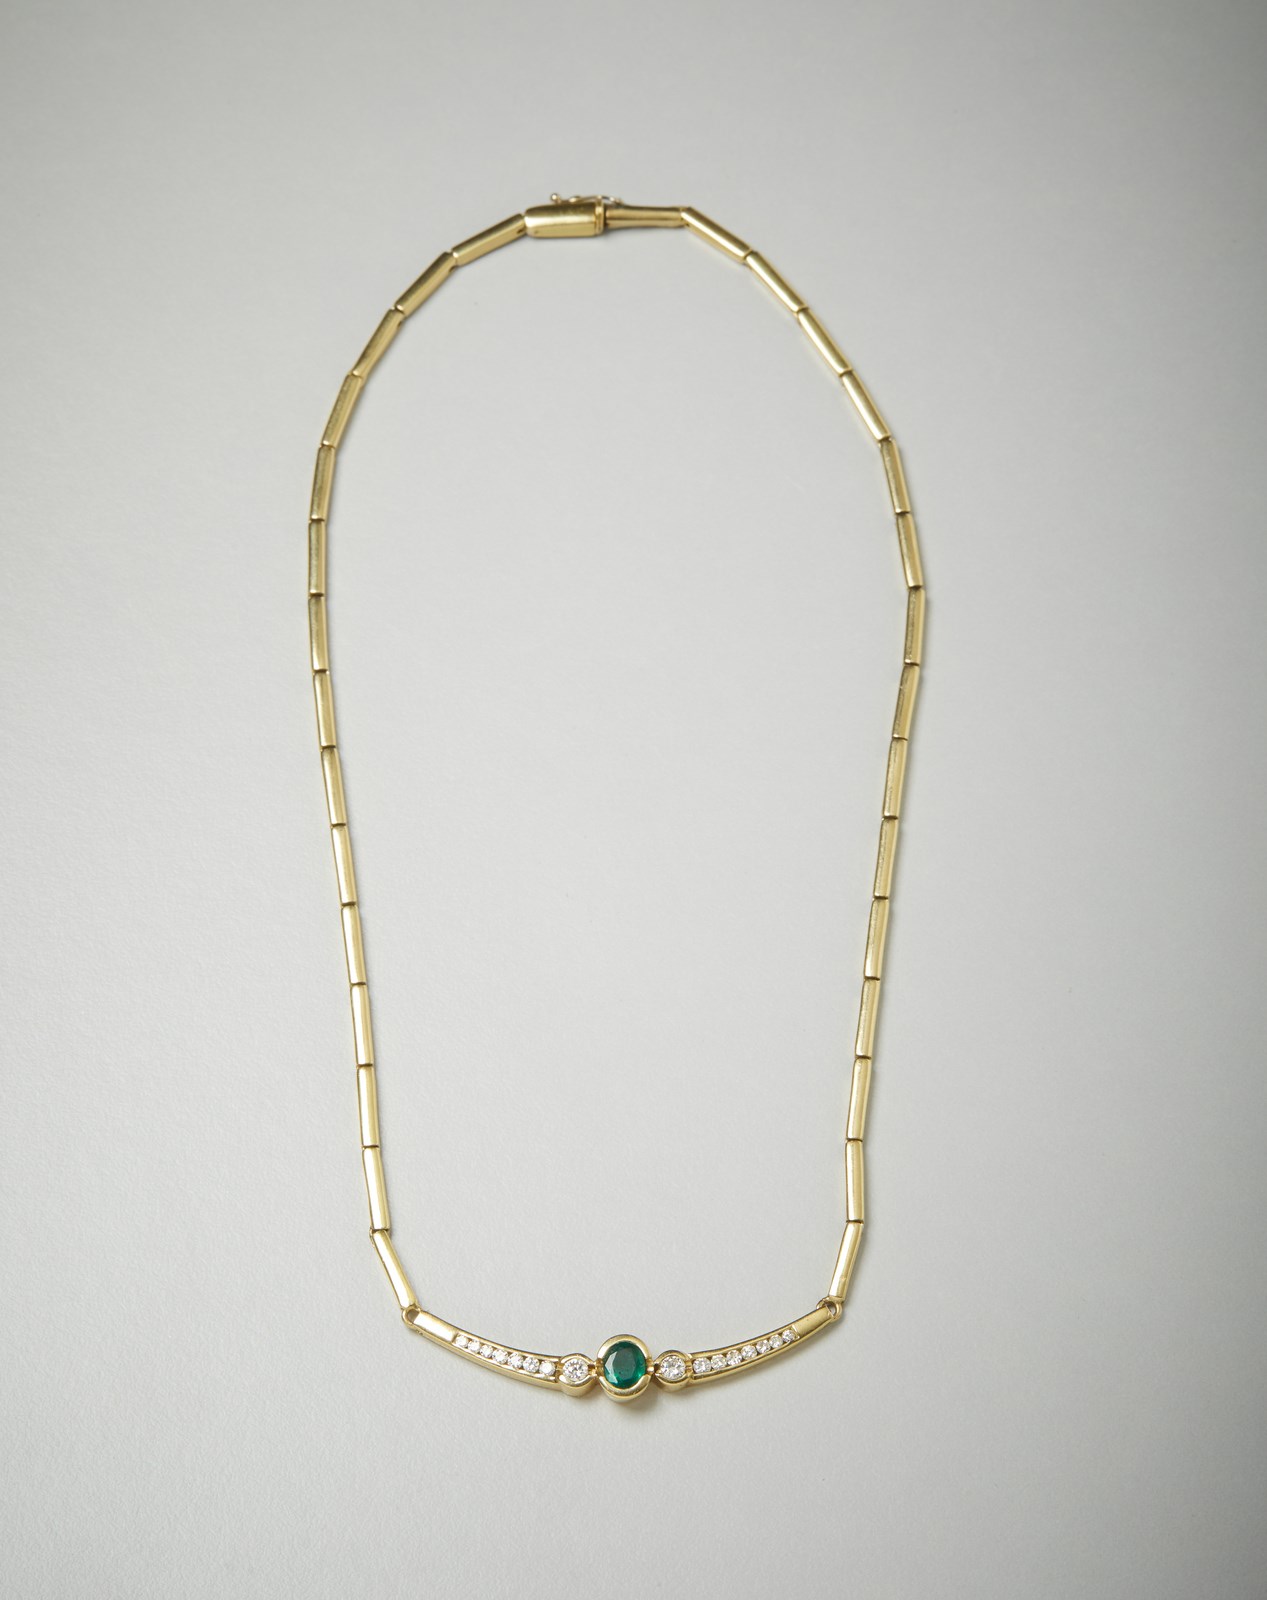 Necklace with segments in yellow gold 750/1000 with central emerald and dégradés diamantini.  (. )